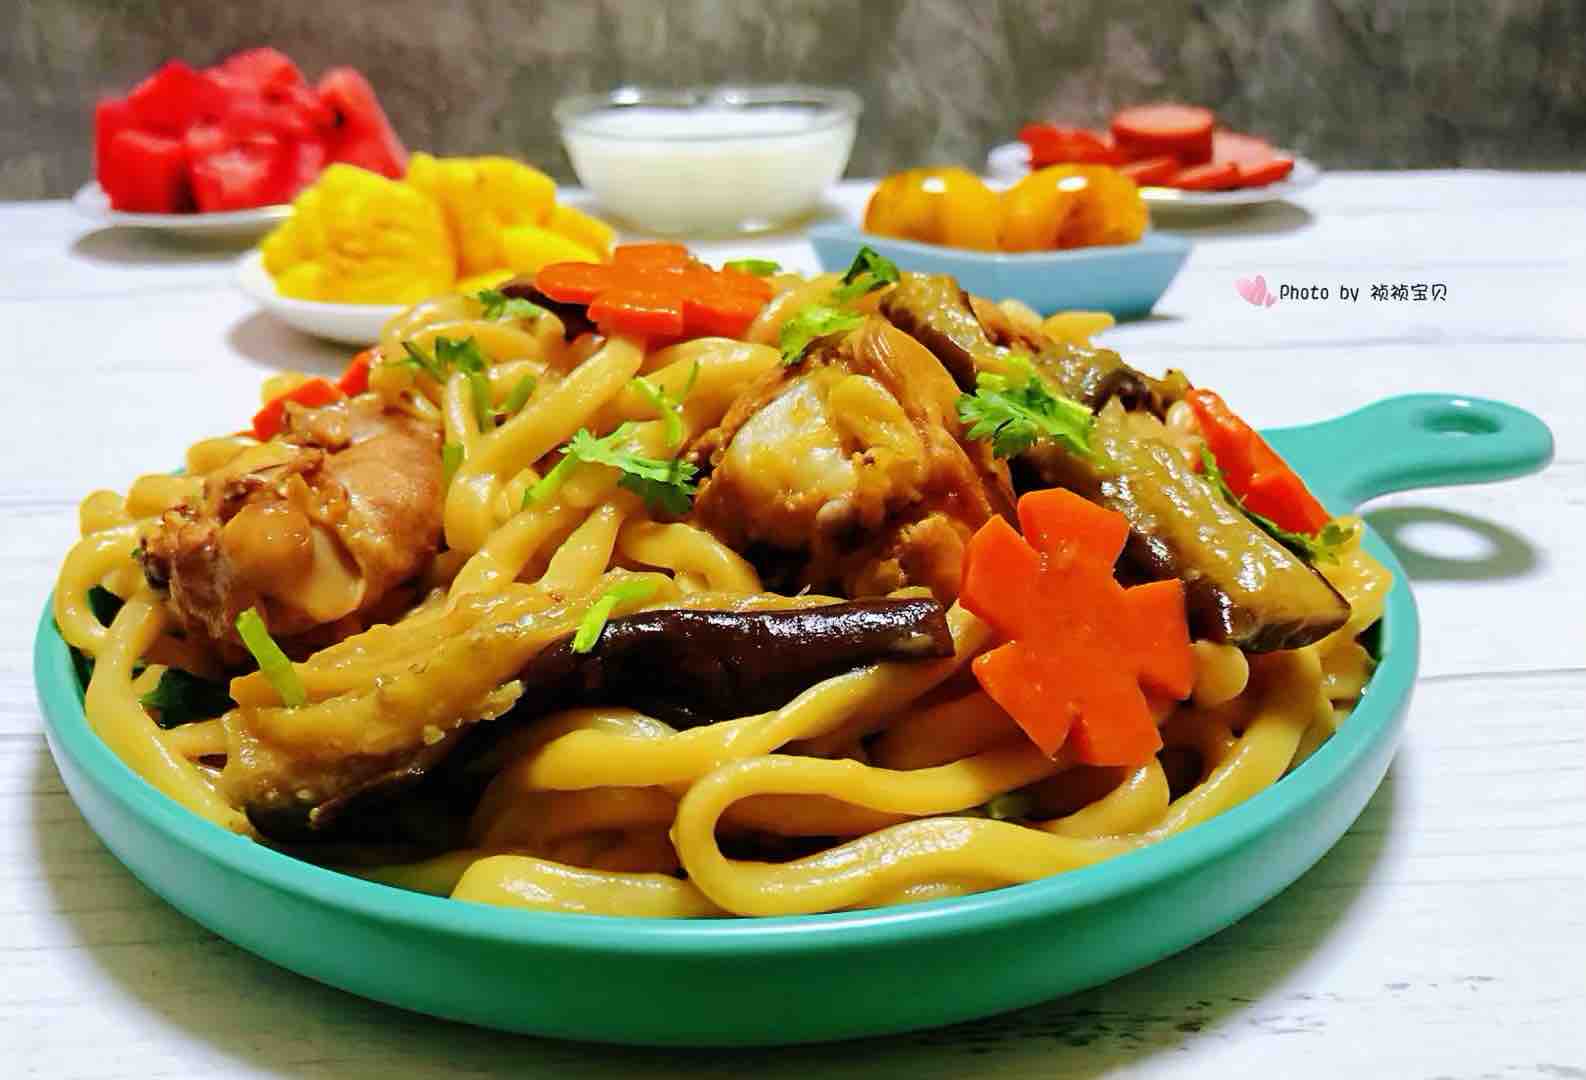 Braised Noodles with Chicken Drumsticks and Eggplant recipe